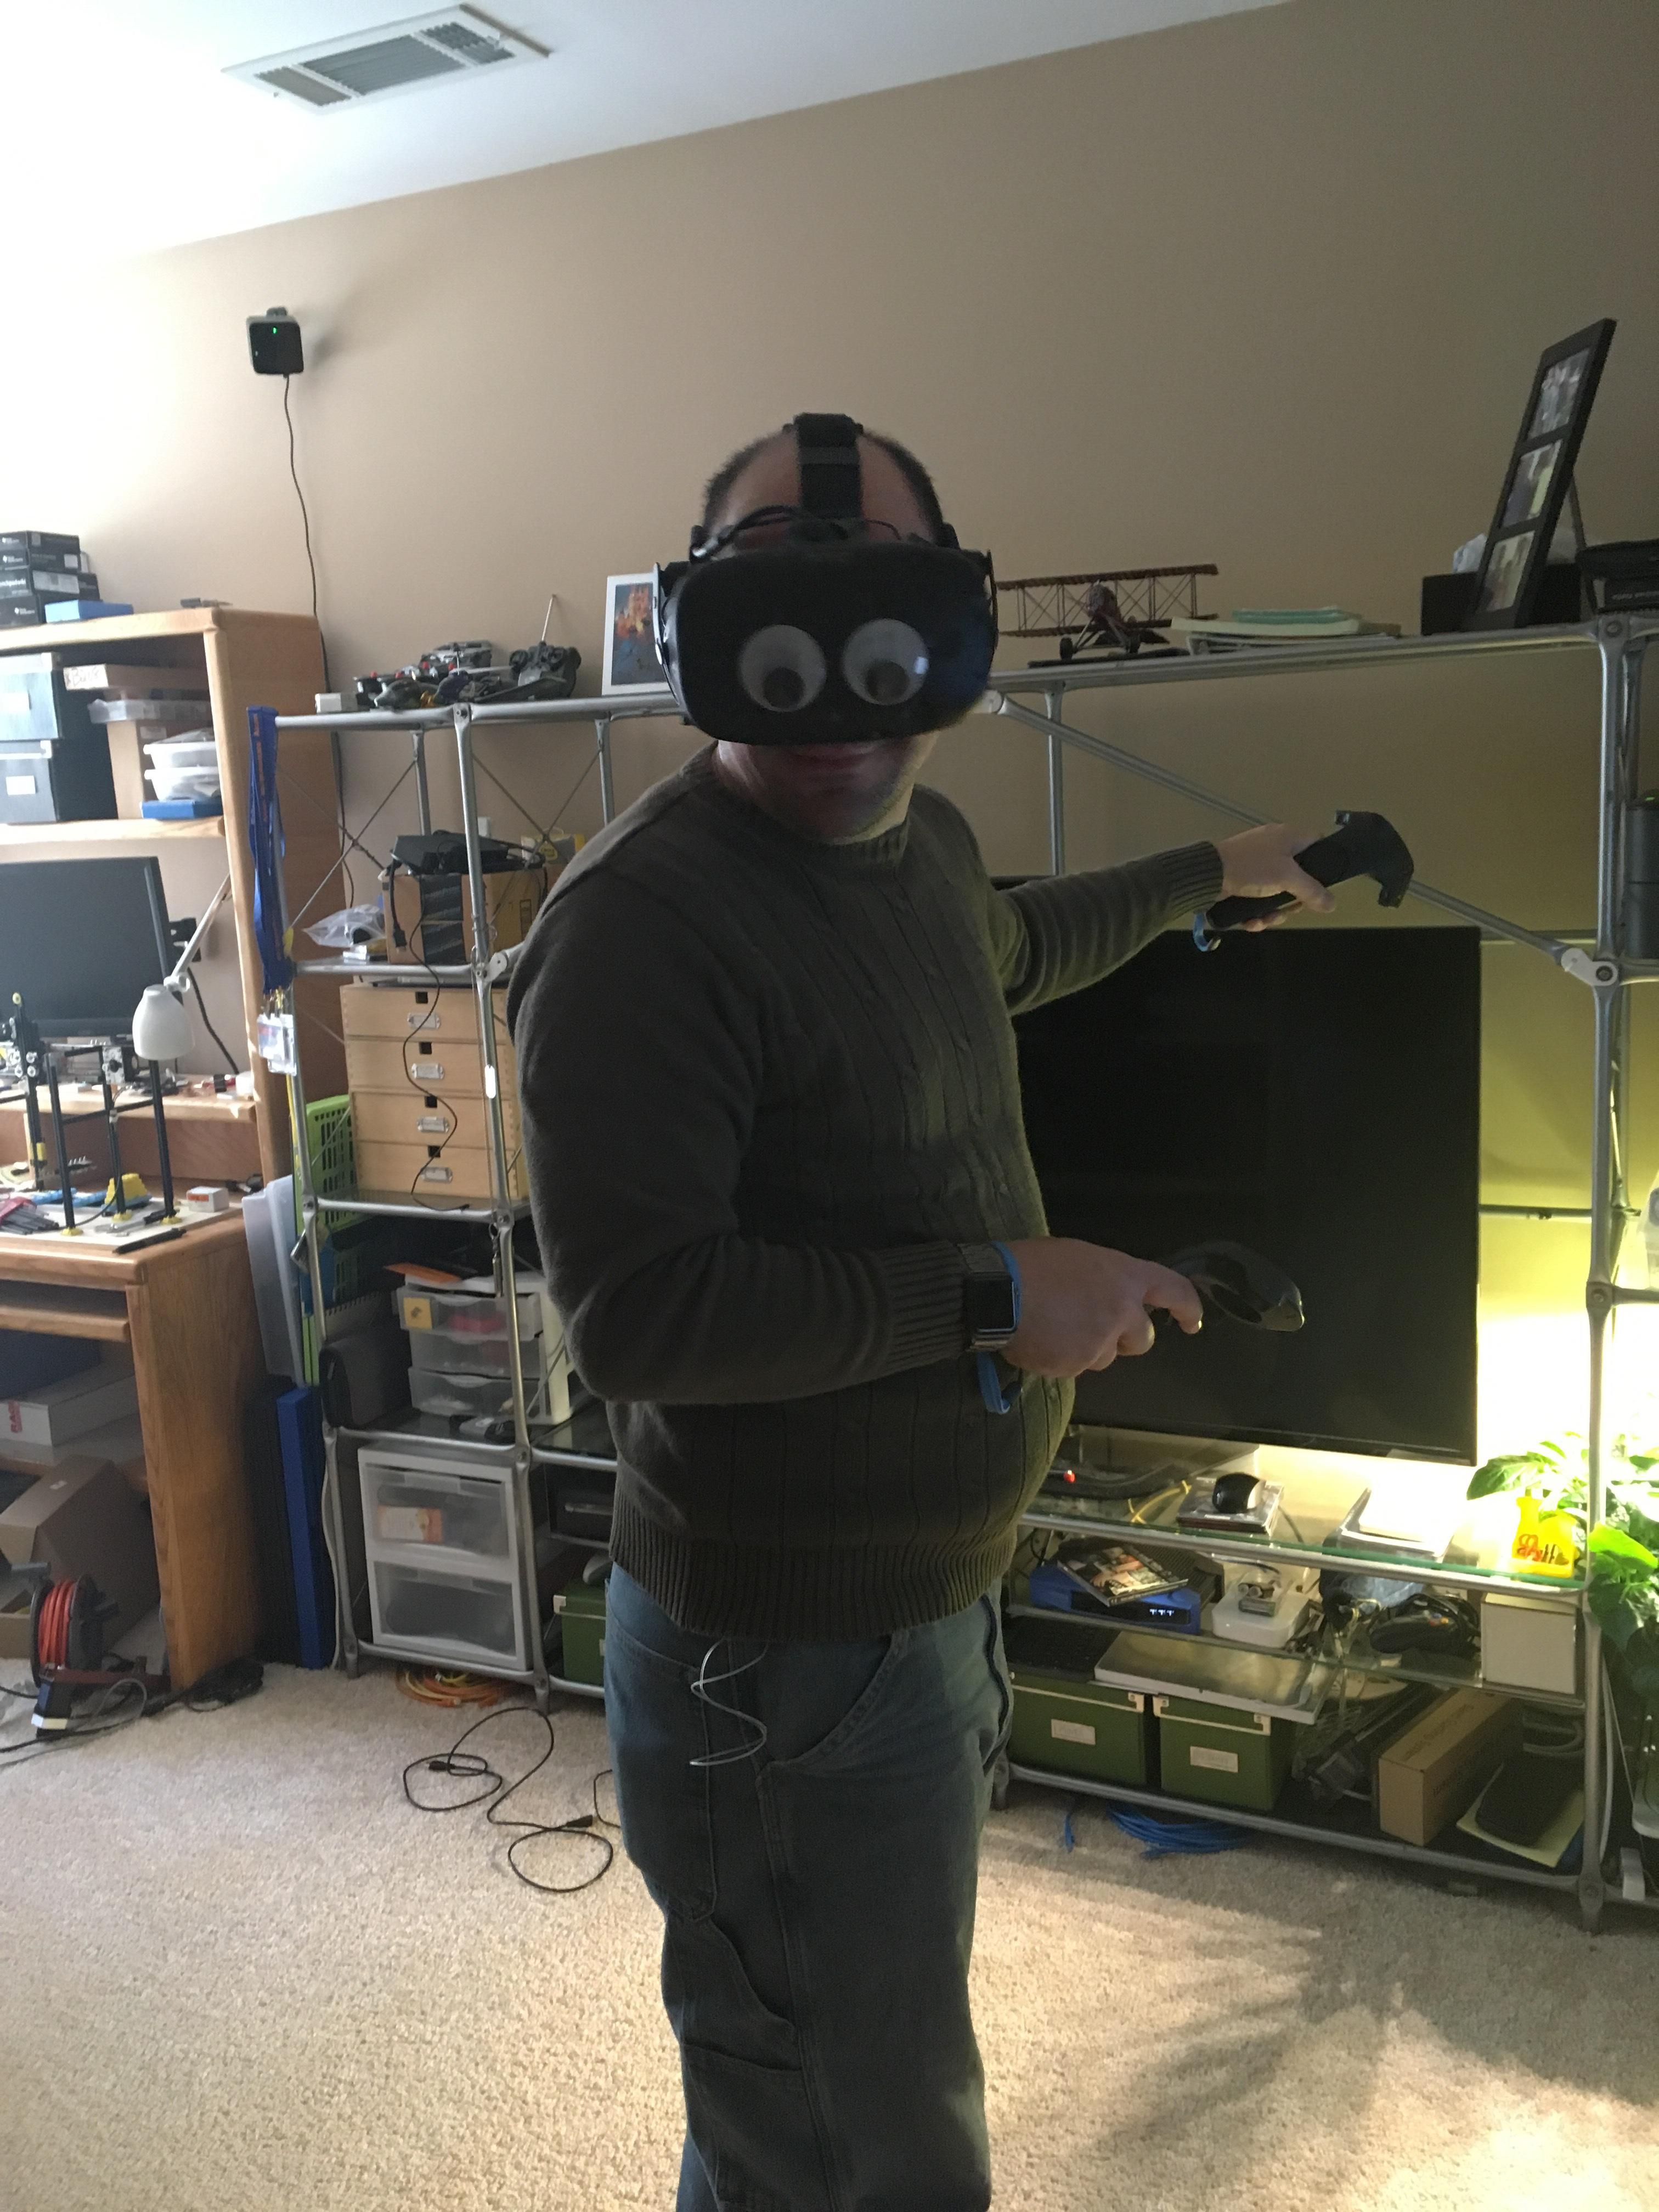 Made a major improvement to our VR headset.